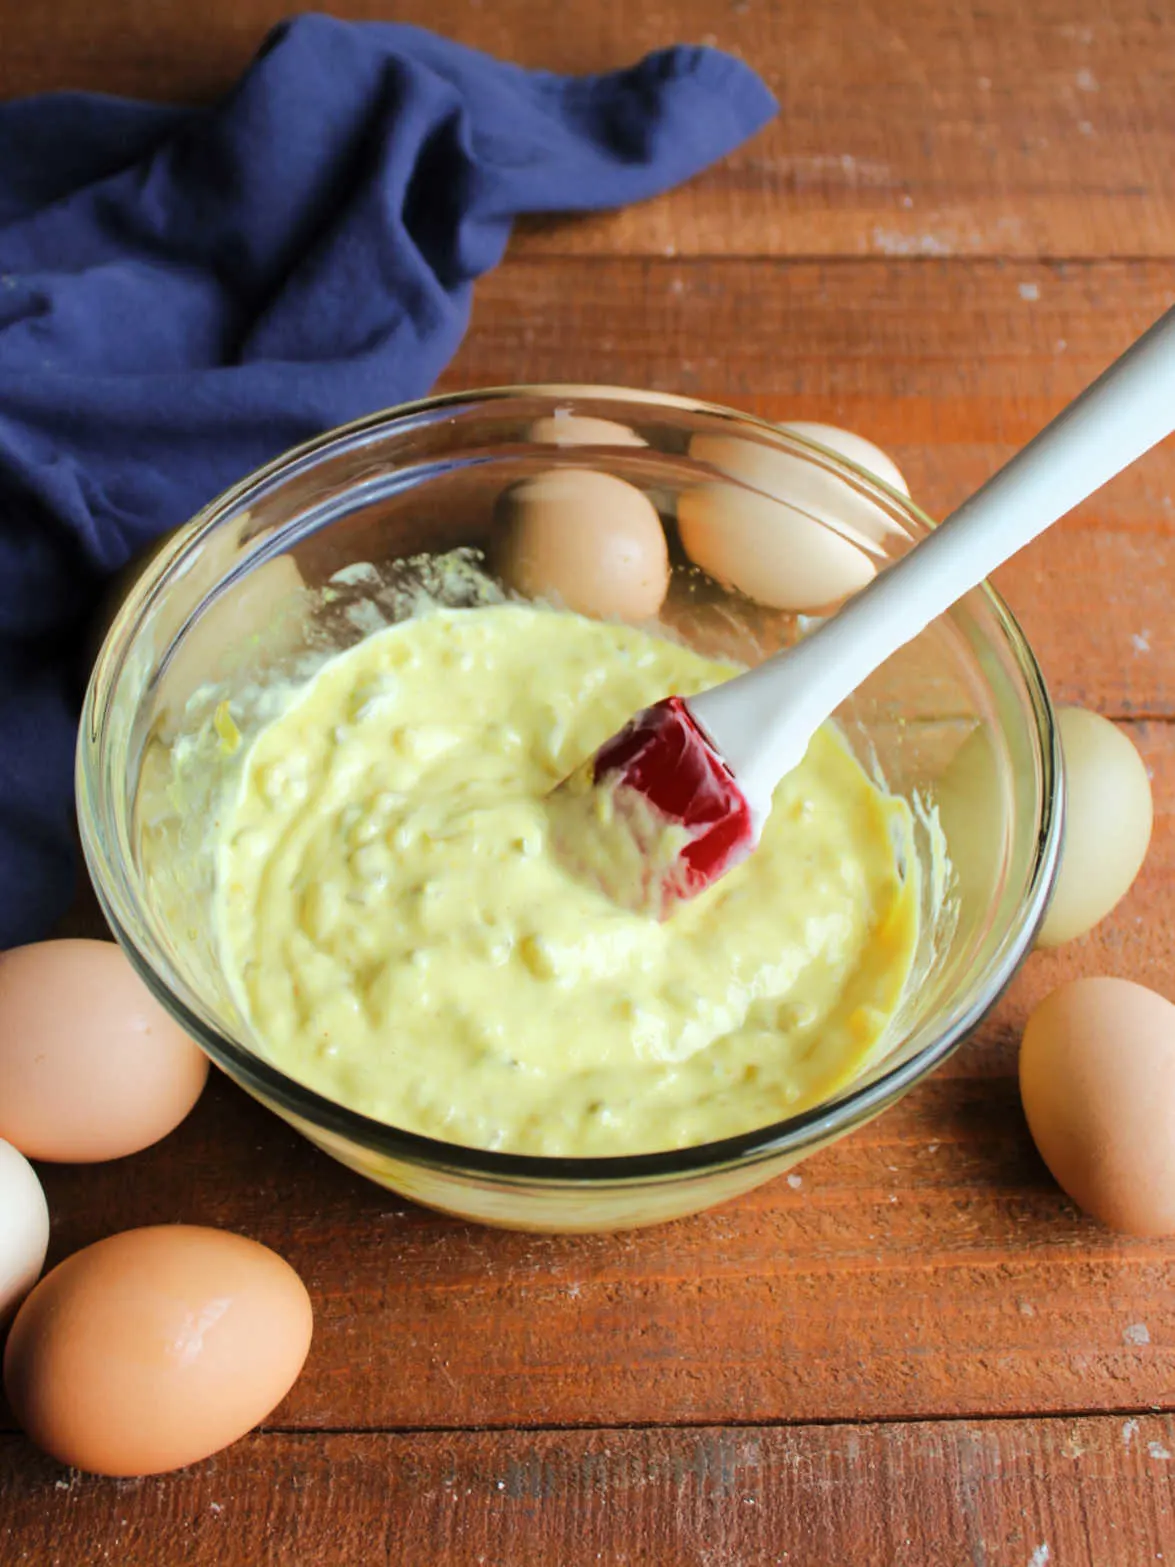 Glass mixing bowl with egg salad dressing mixture made from miracle whip, mustard, and pickle relish.